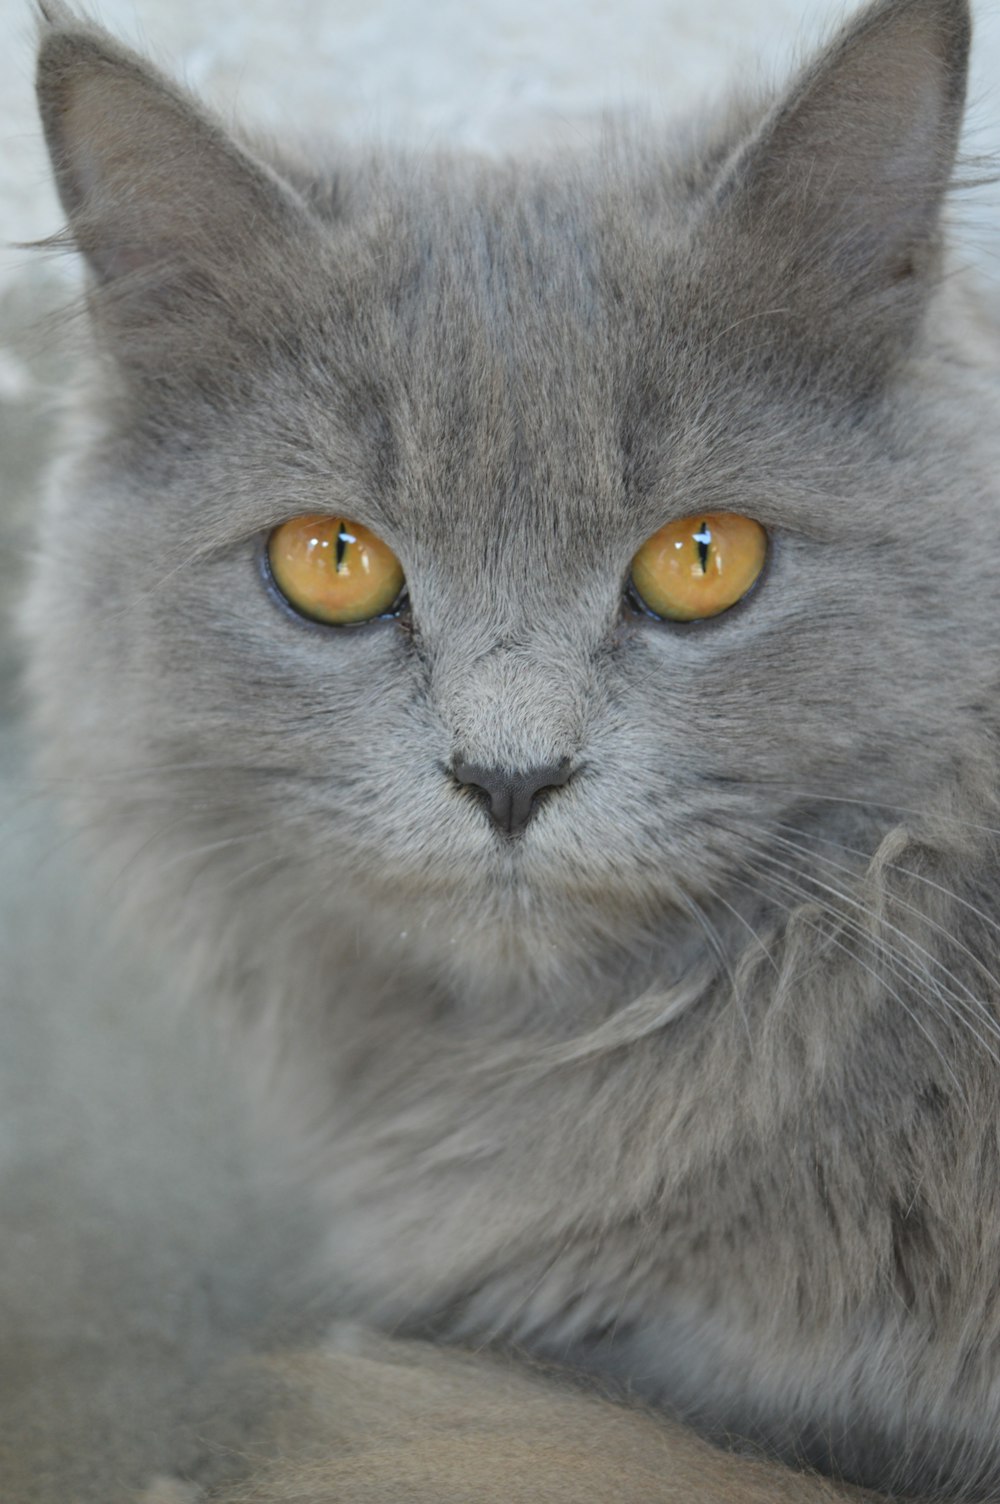 gray cat in close up photography